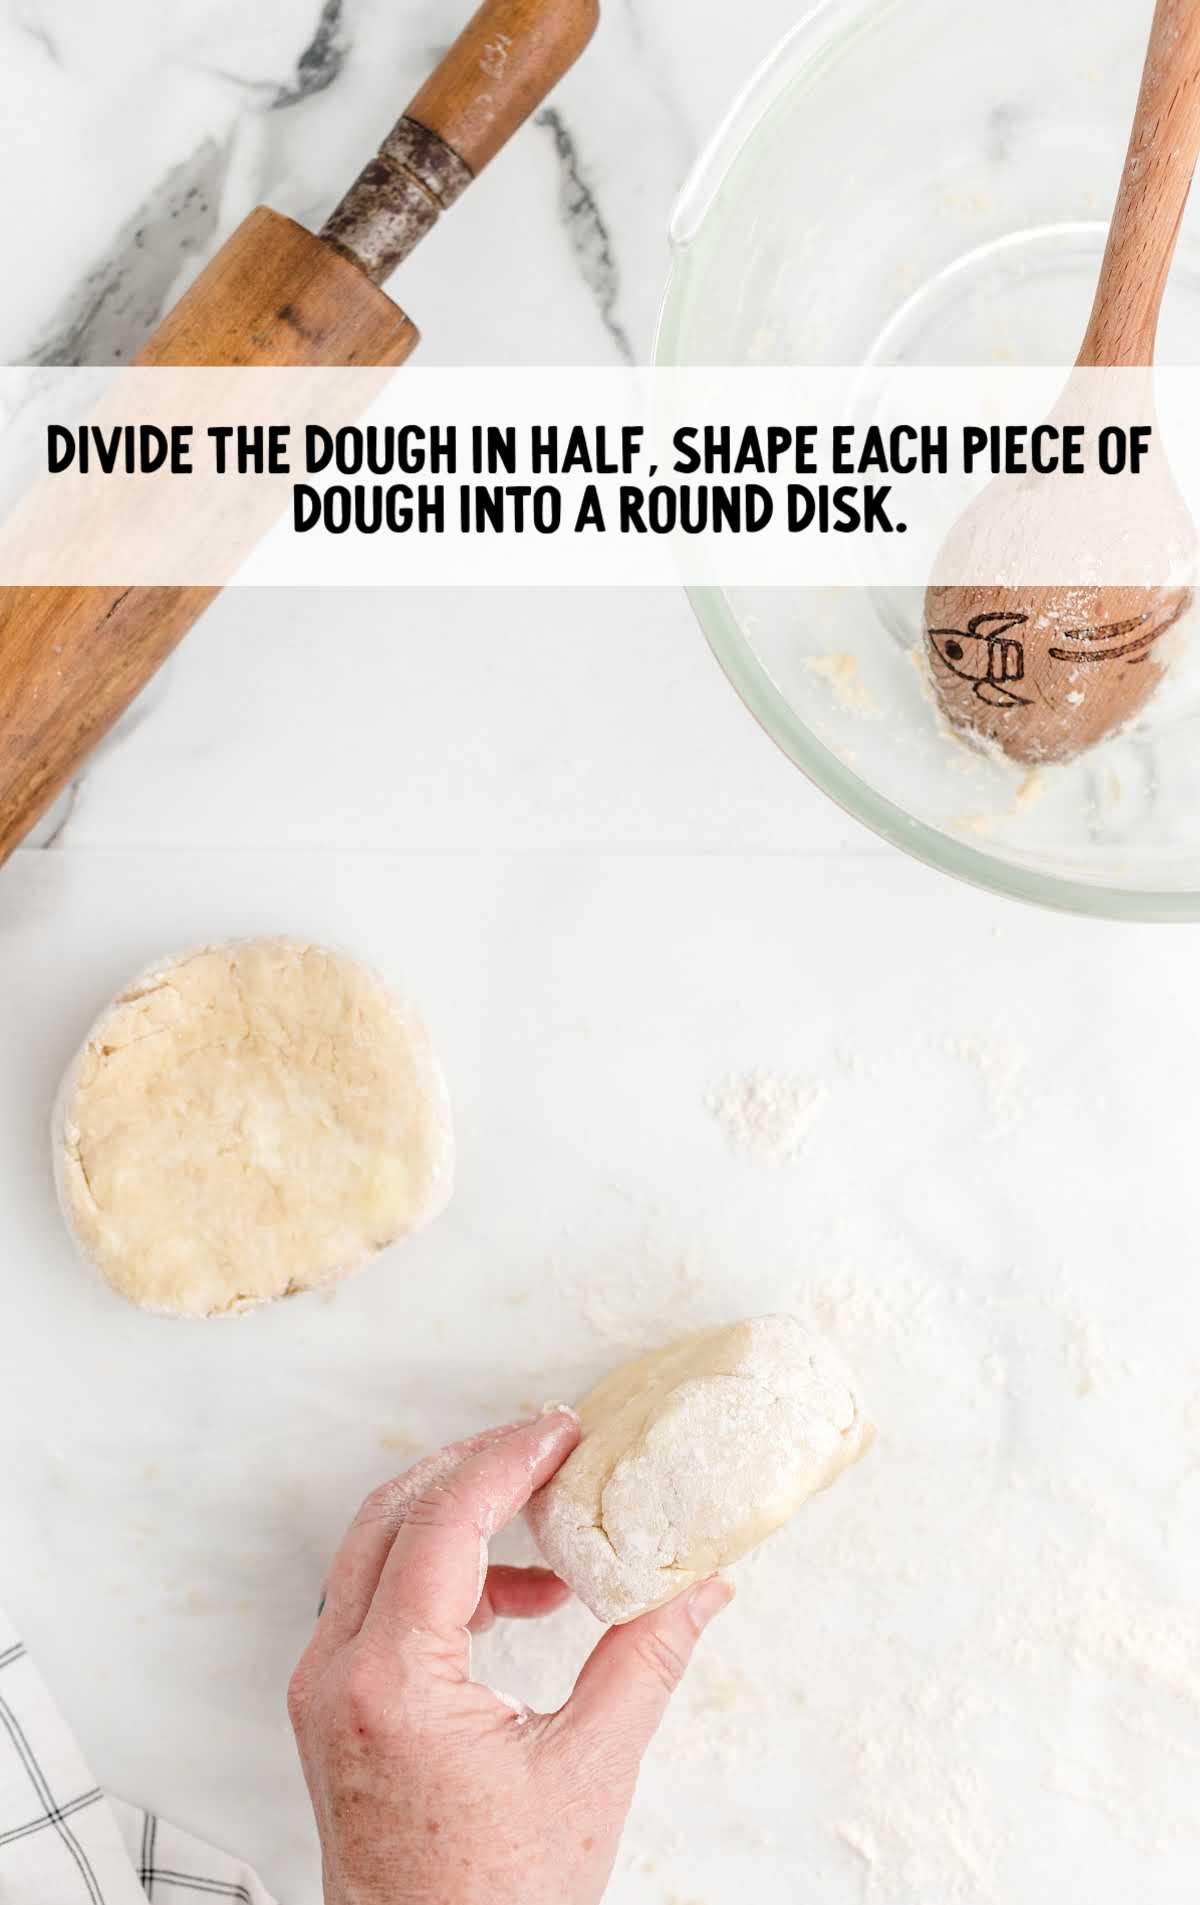 dough divided into half and shaped into a round disk